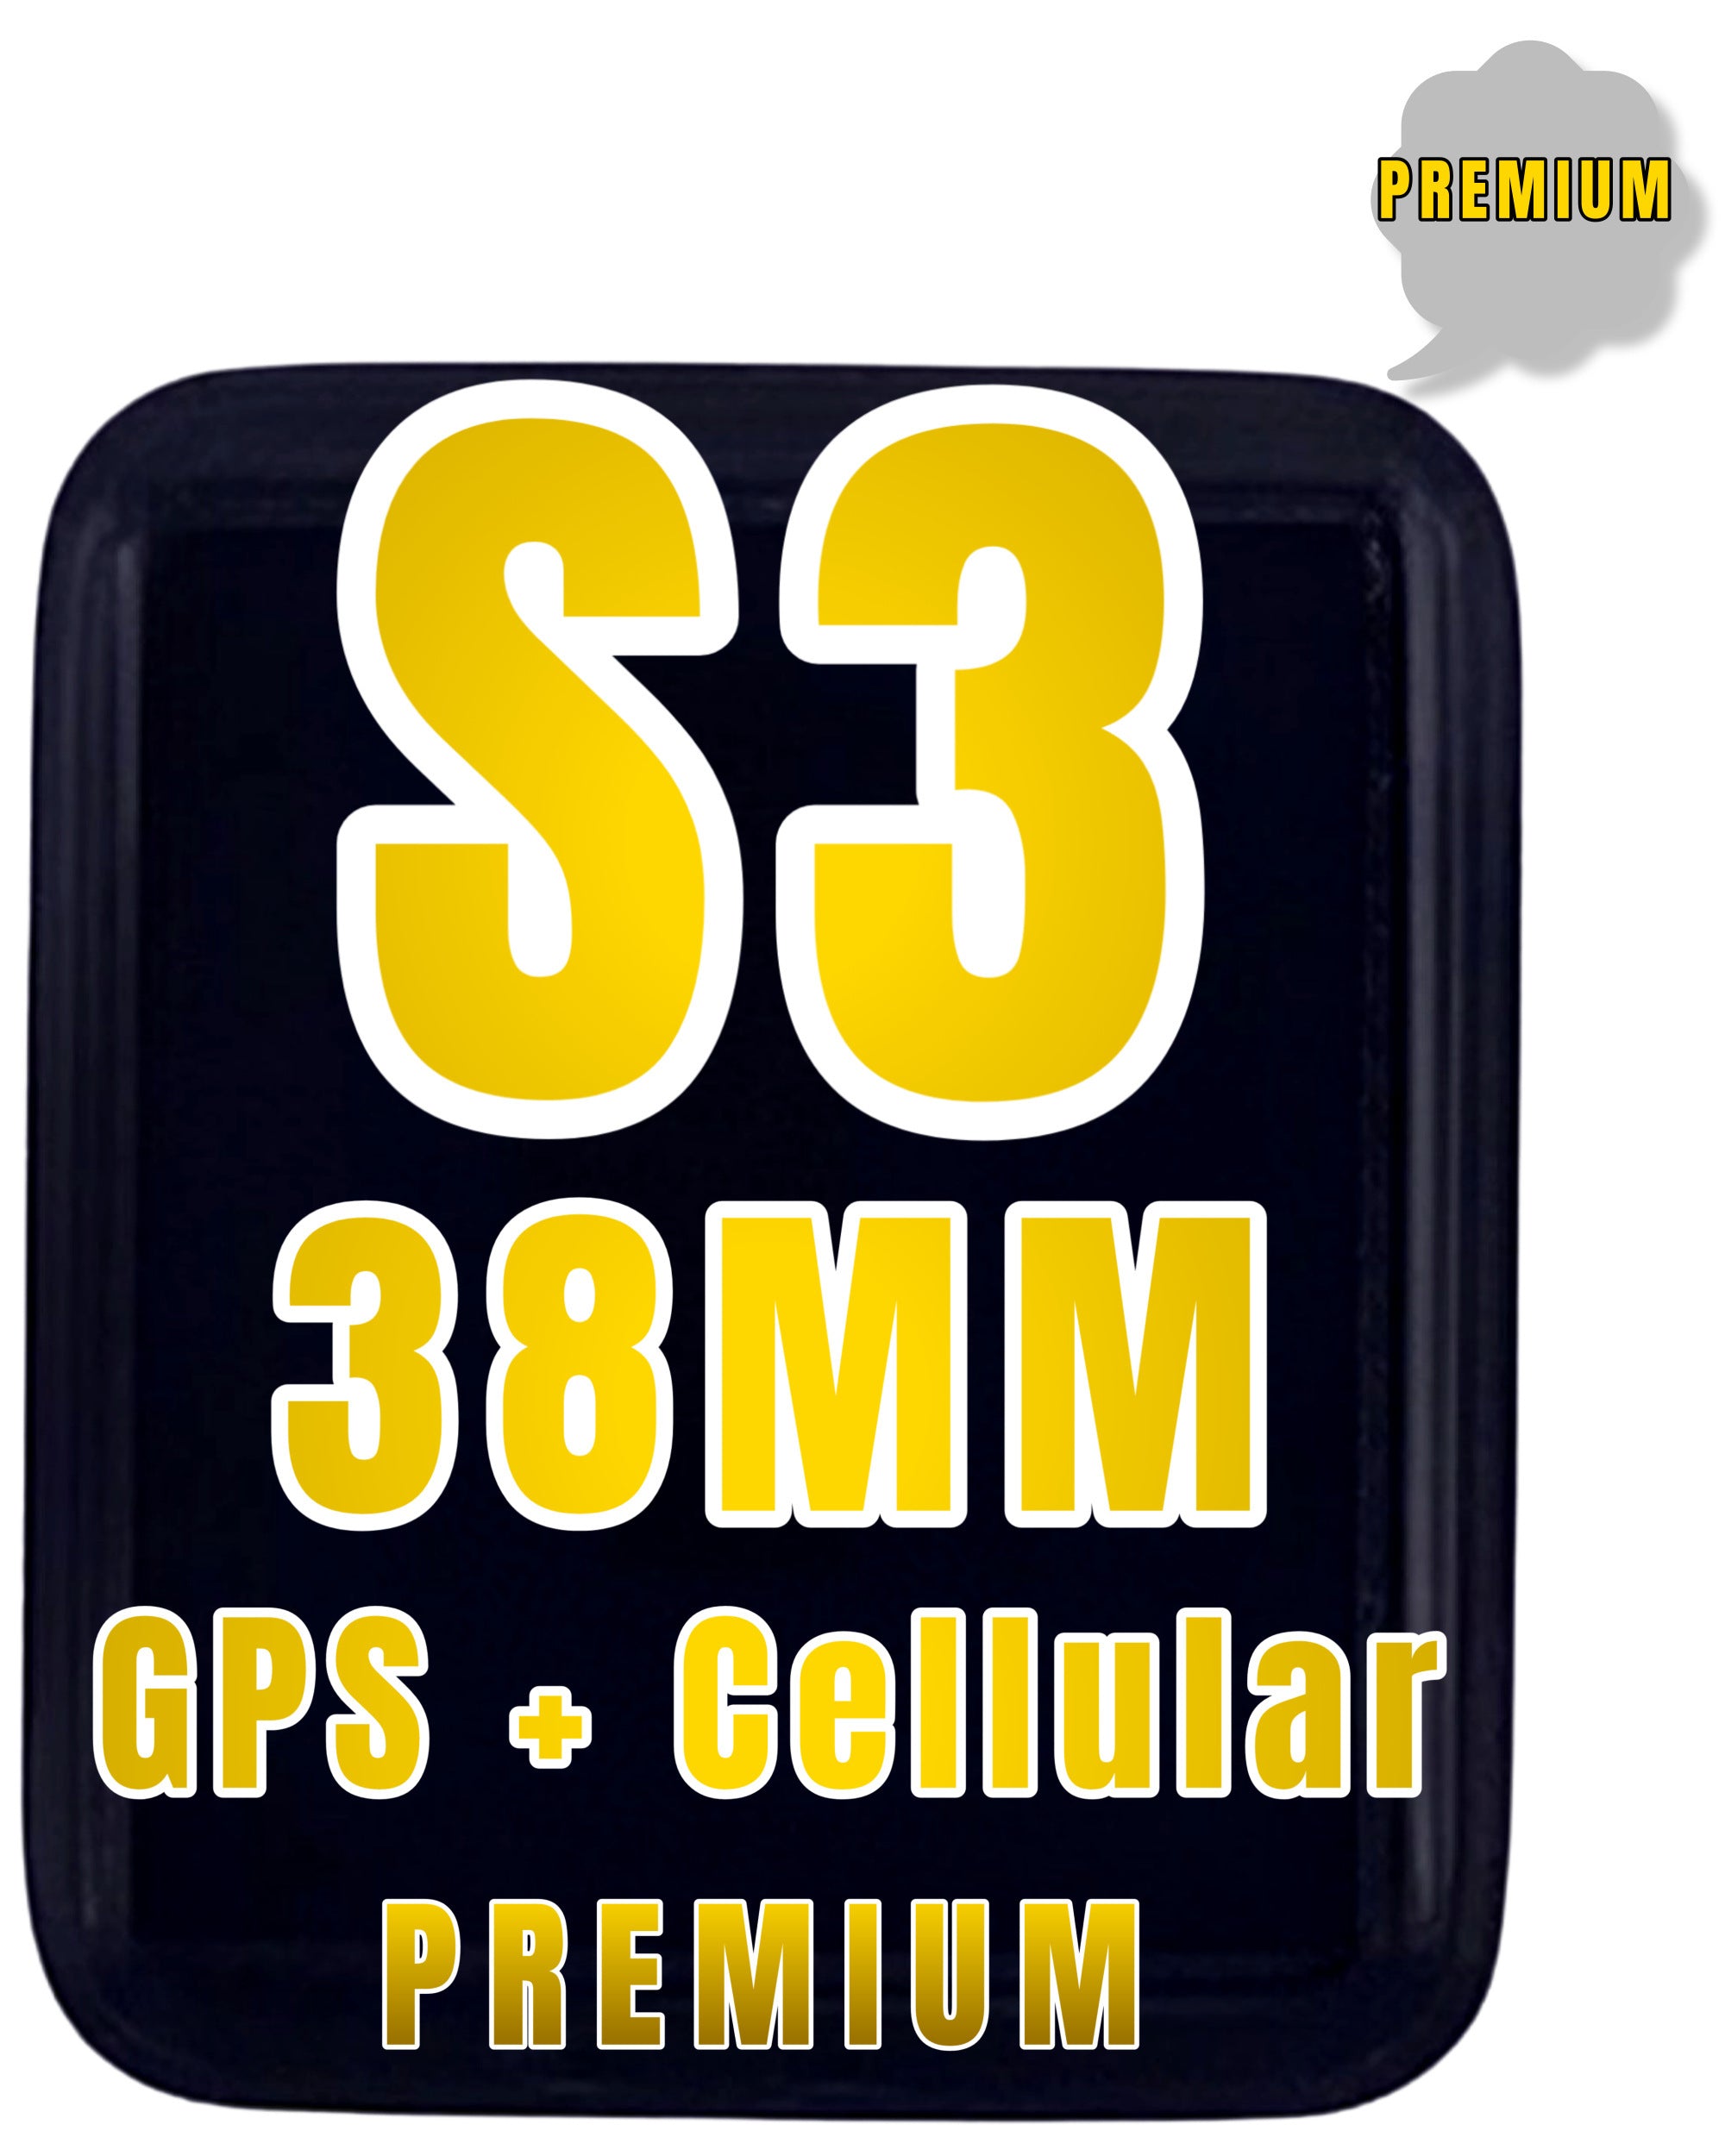 For Watch Series 3 (38MM) OLED Screen Replacement (GPS + Cellular Version) (Premium)